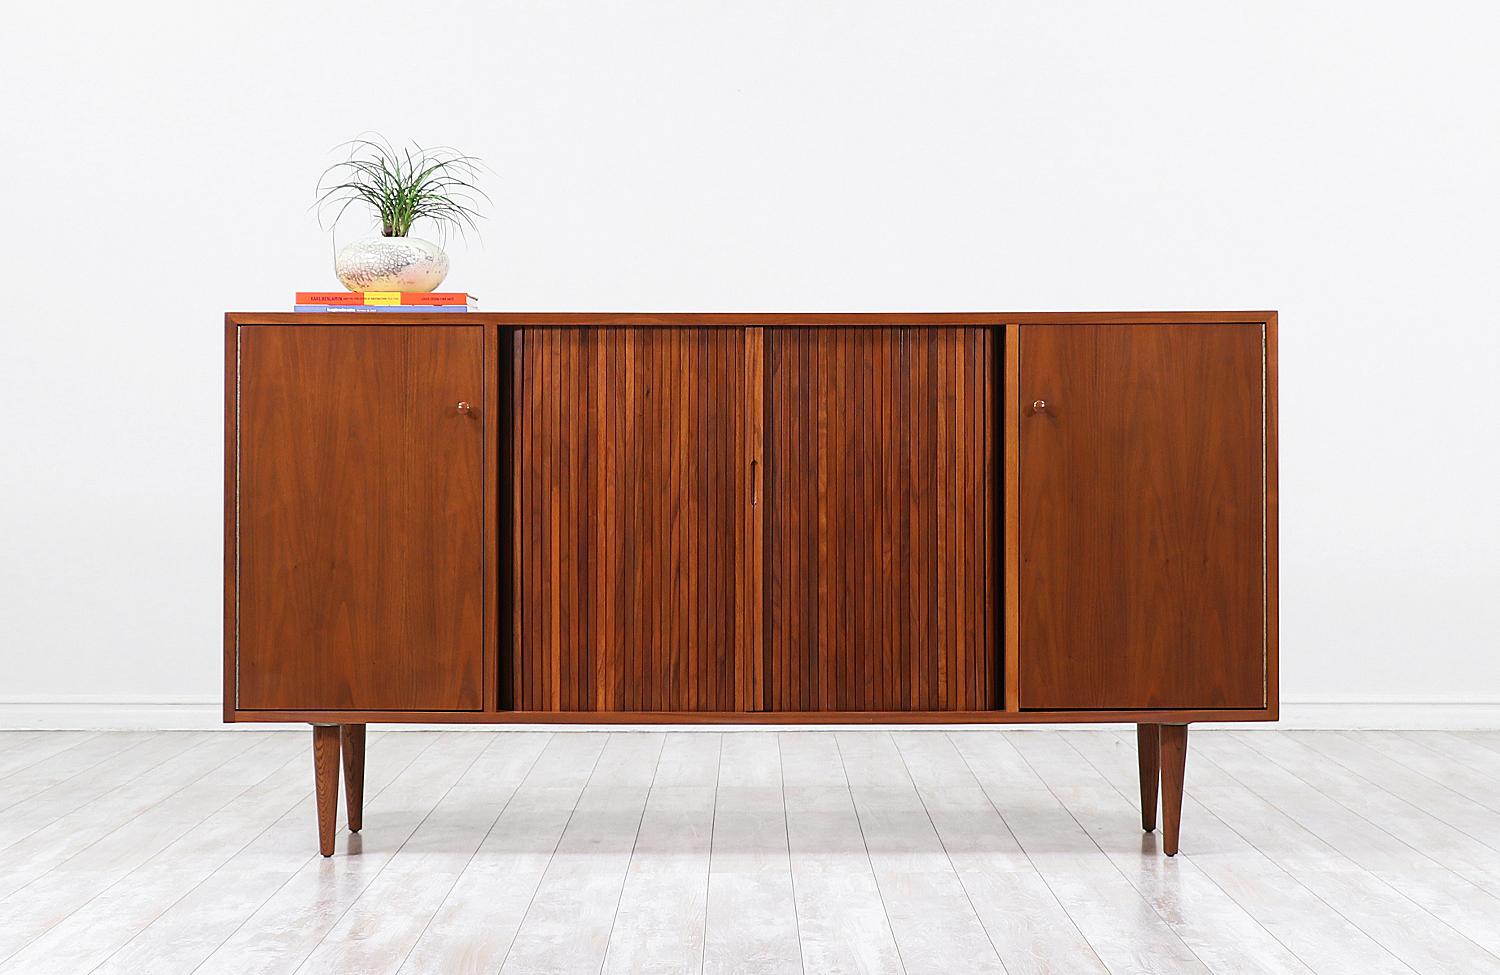 Mid-Century Modern credenza designed by Milo Baughman for Glenn of California in the United States circa 1950s. This exceptional credenza is crafted in walnut wood that features a closed shelved compartment on each side and a set of tambour doors